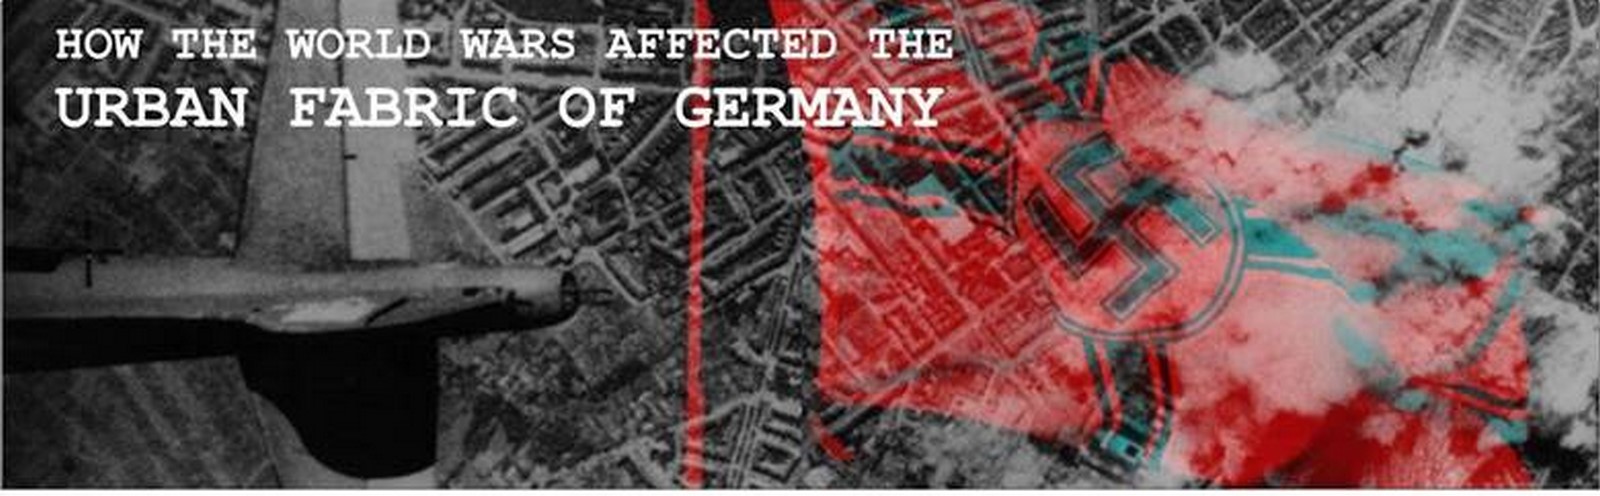 How the World Wars affected the urban fabric of Germany - Sheet1